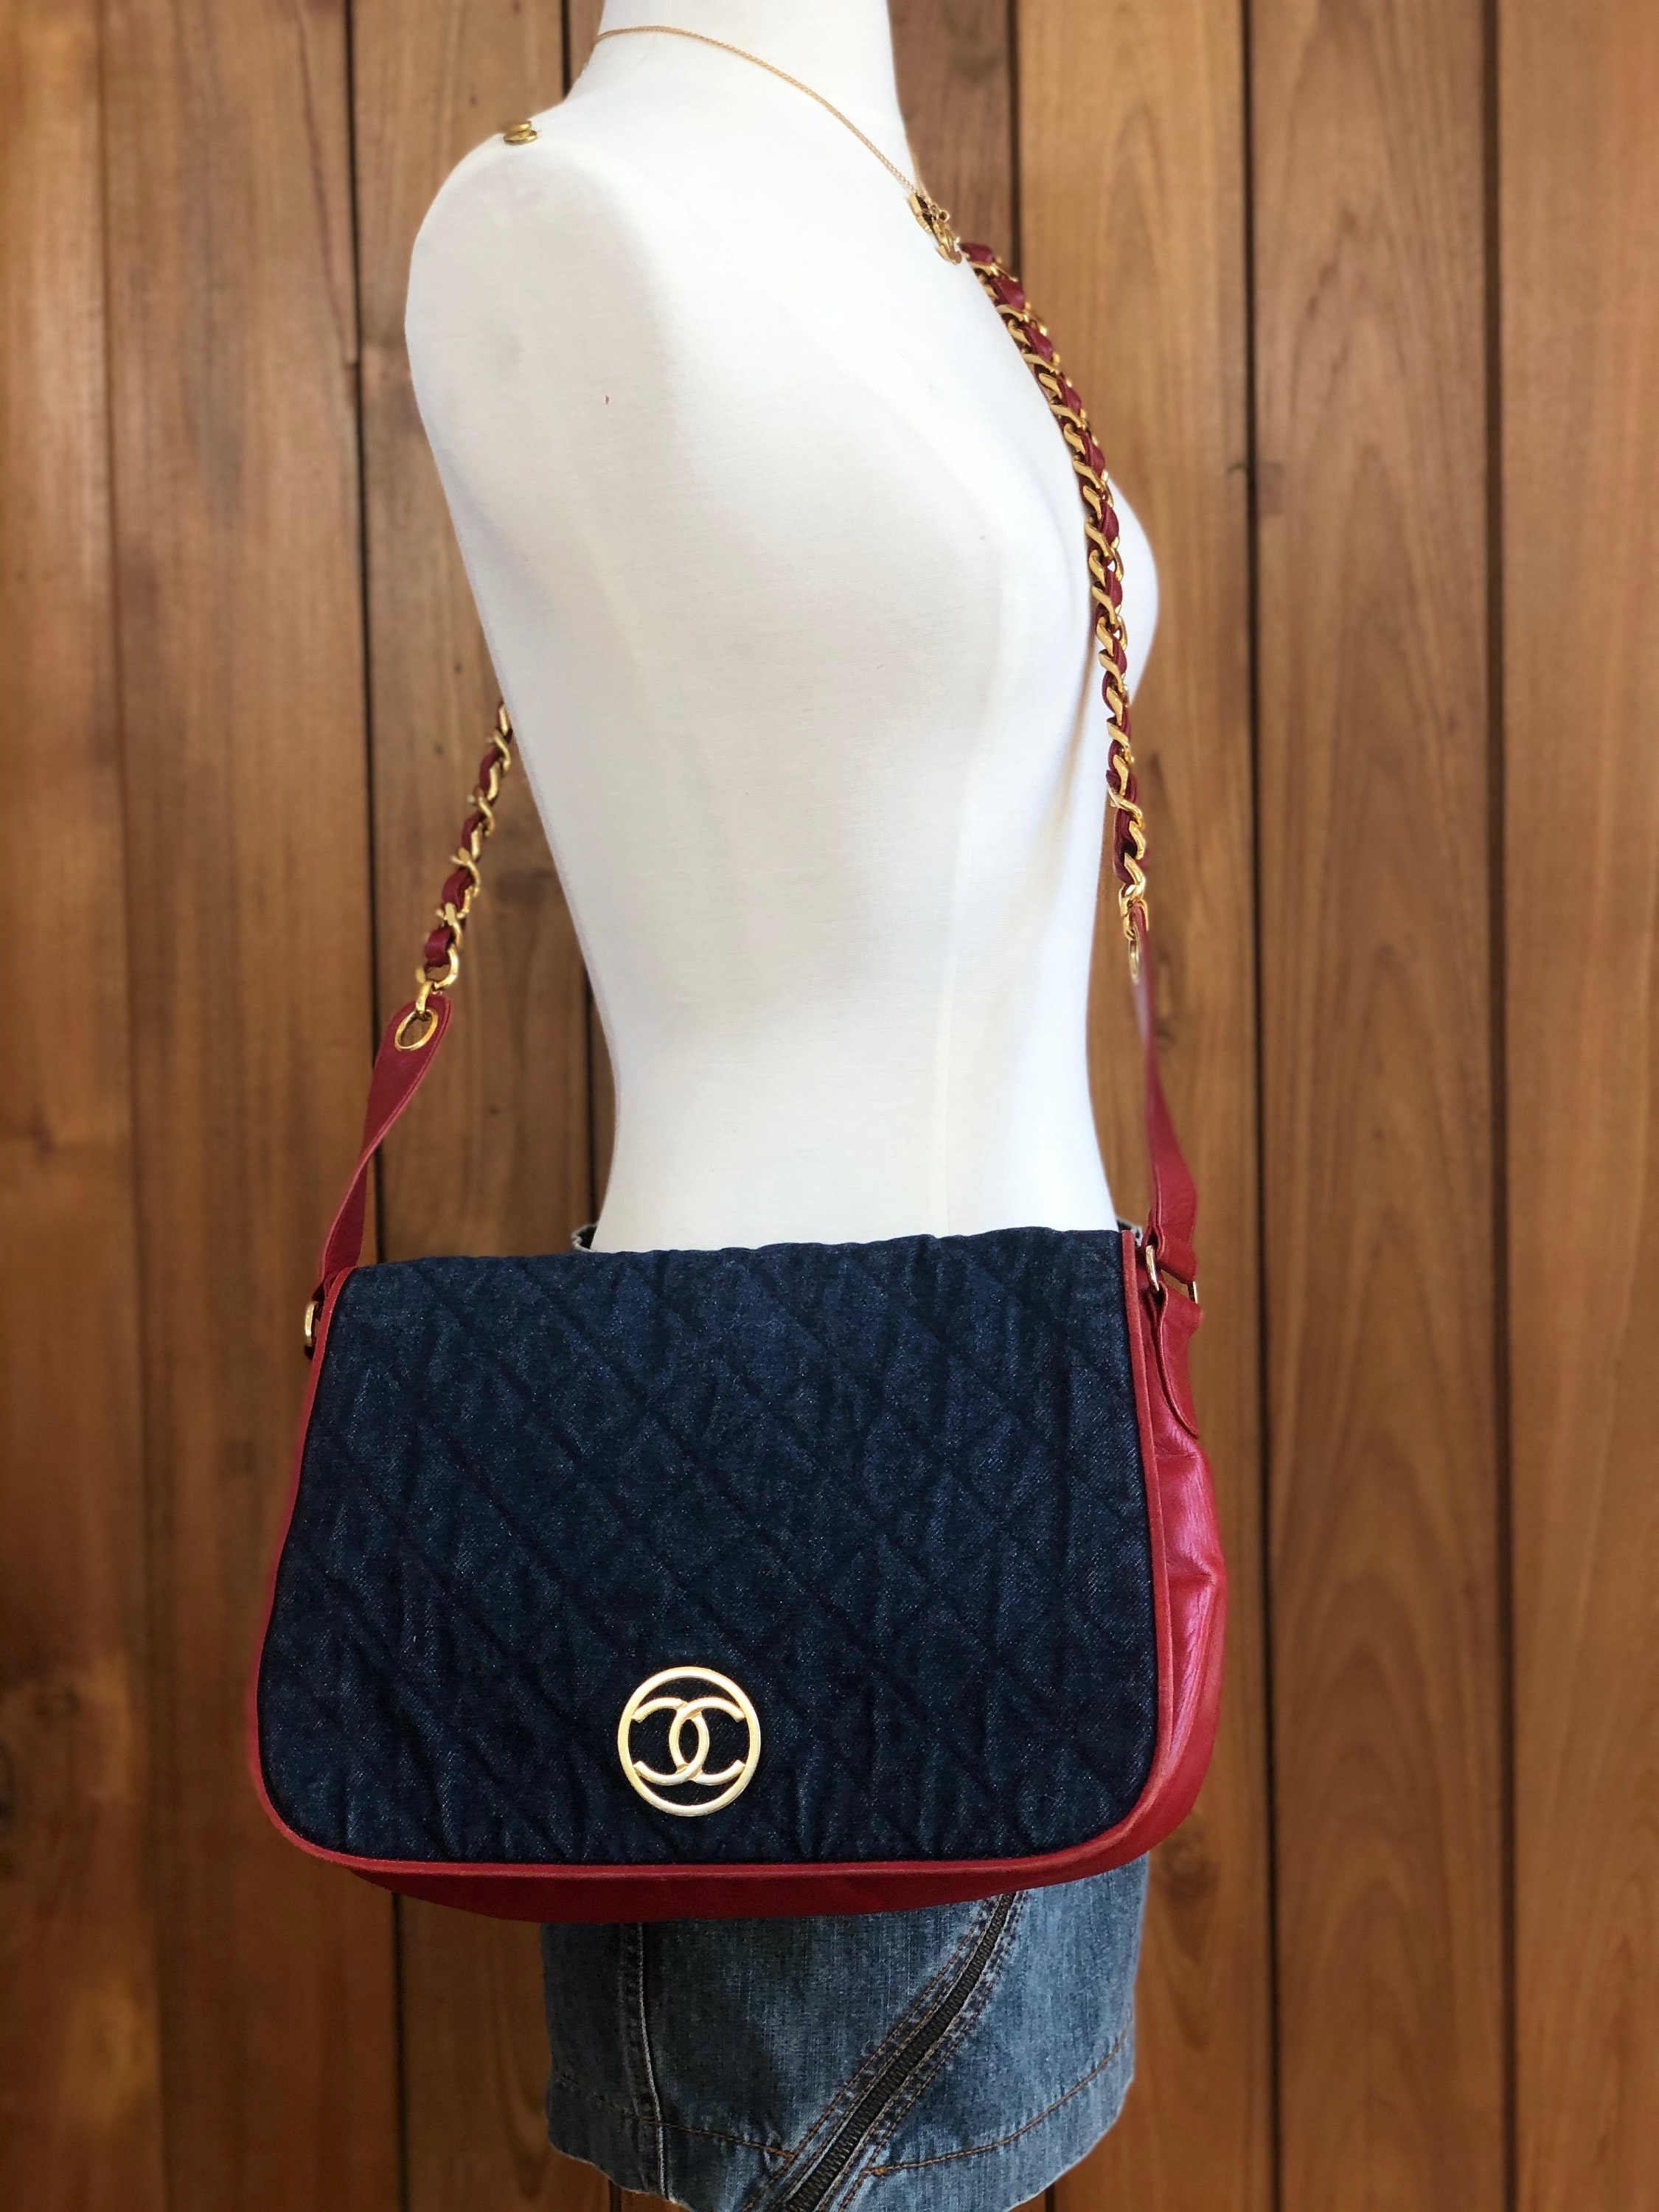 This denim Chanel bag is a rare early 90s vintage find that's also